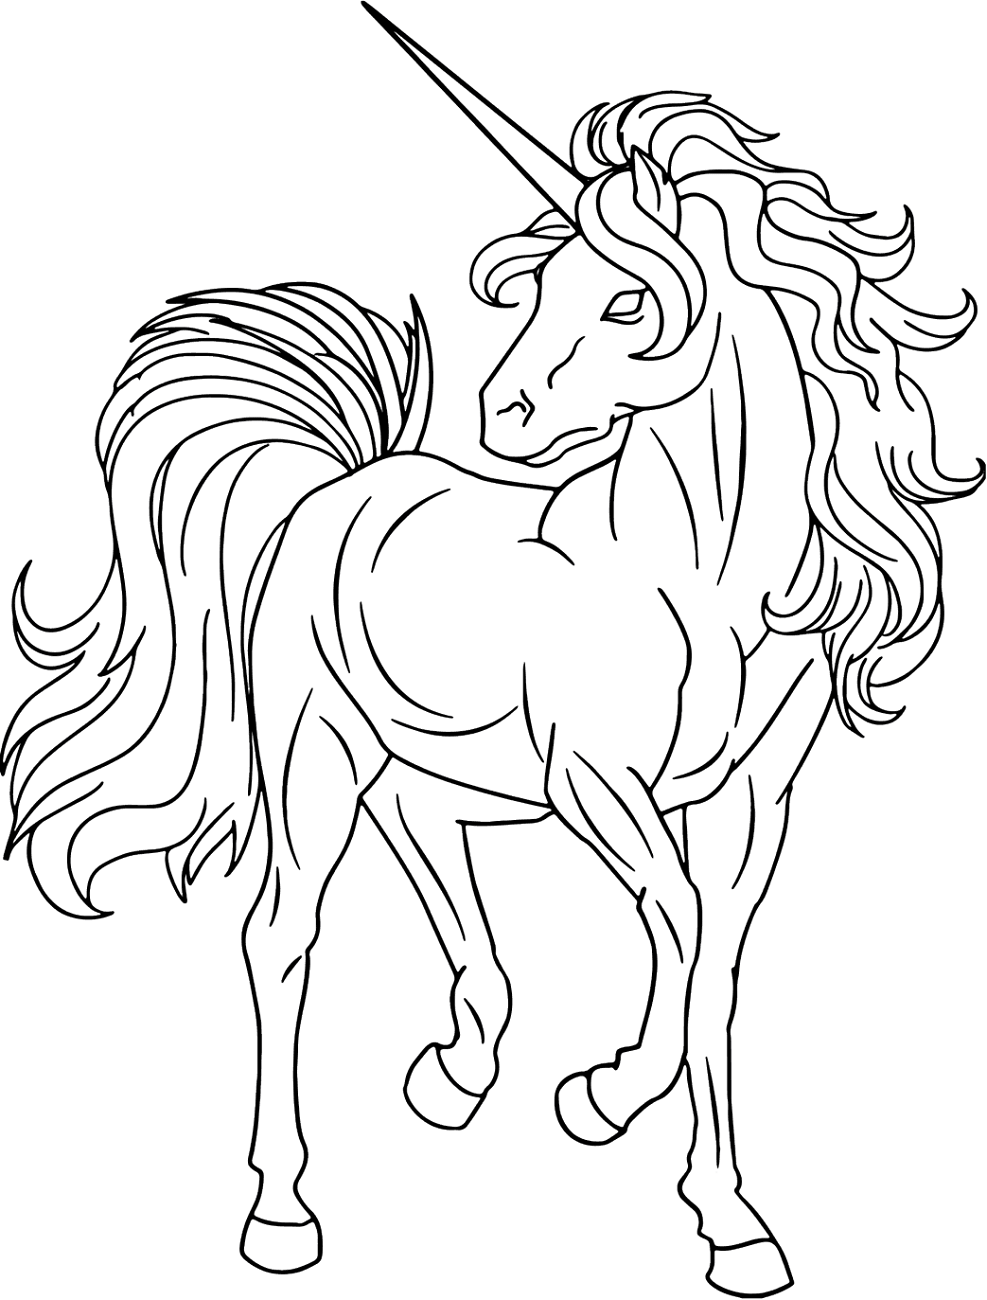 Awesome Unicorn Coloring Page